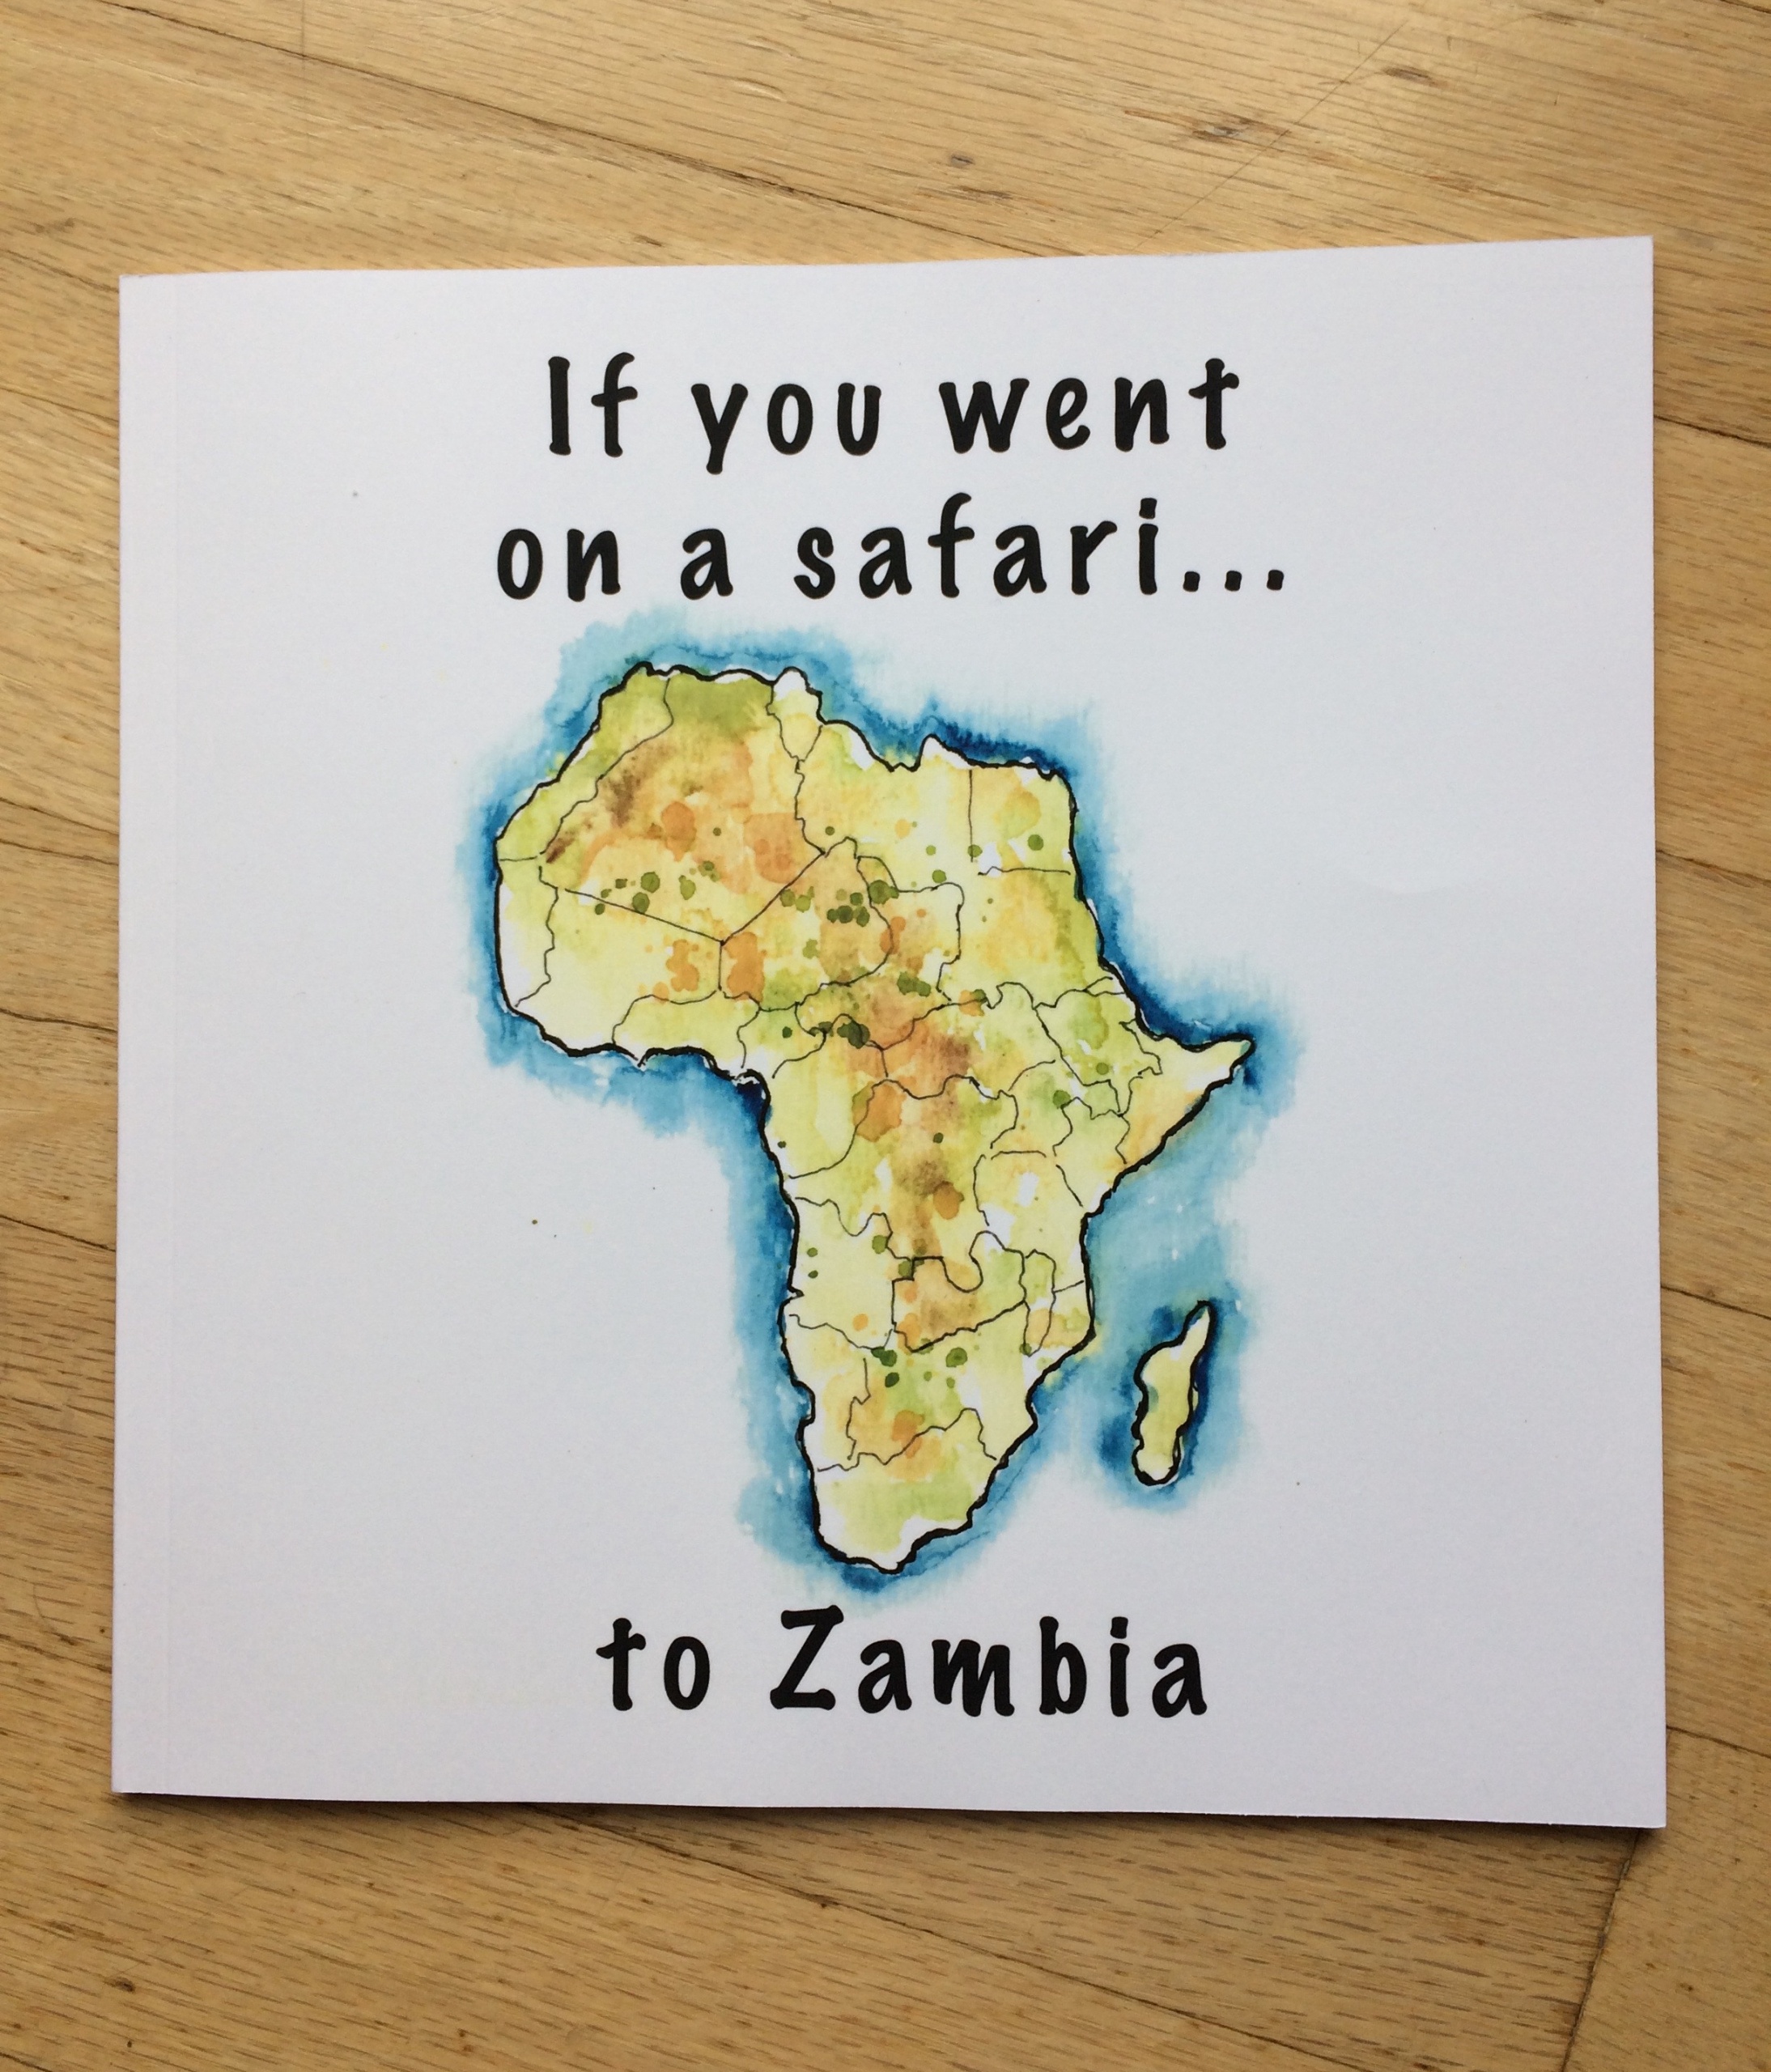 Book If you went on a Safari to Zambia